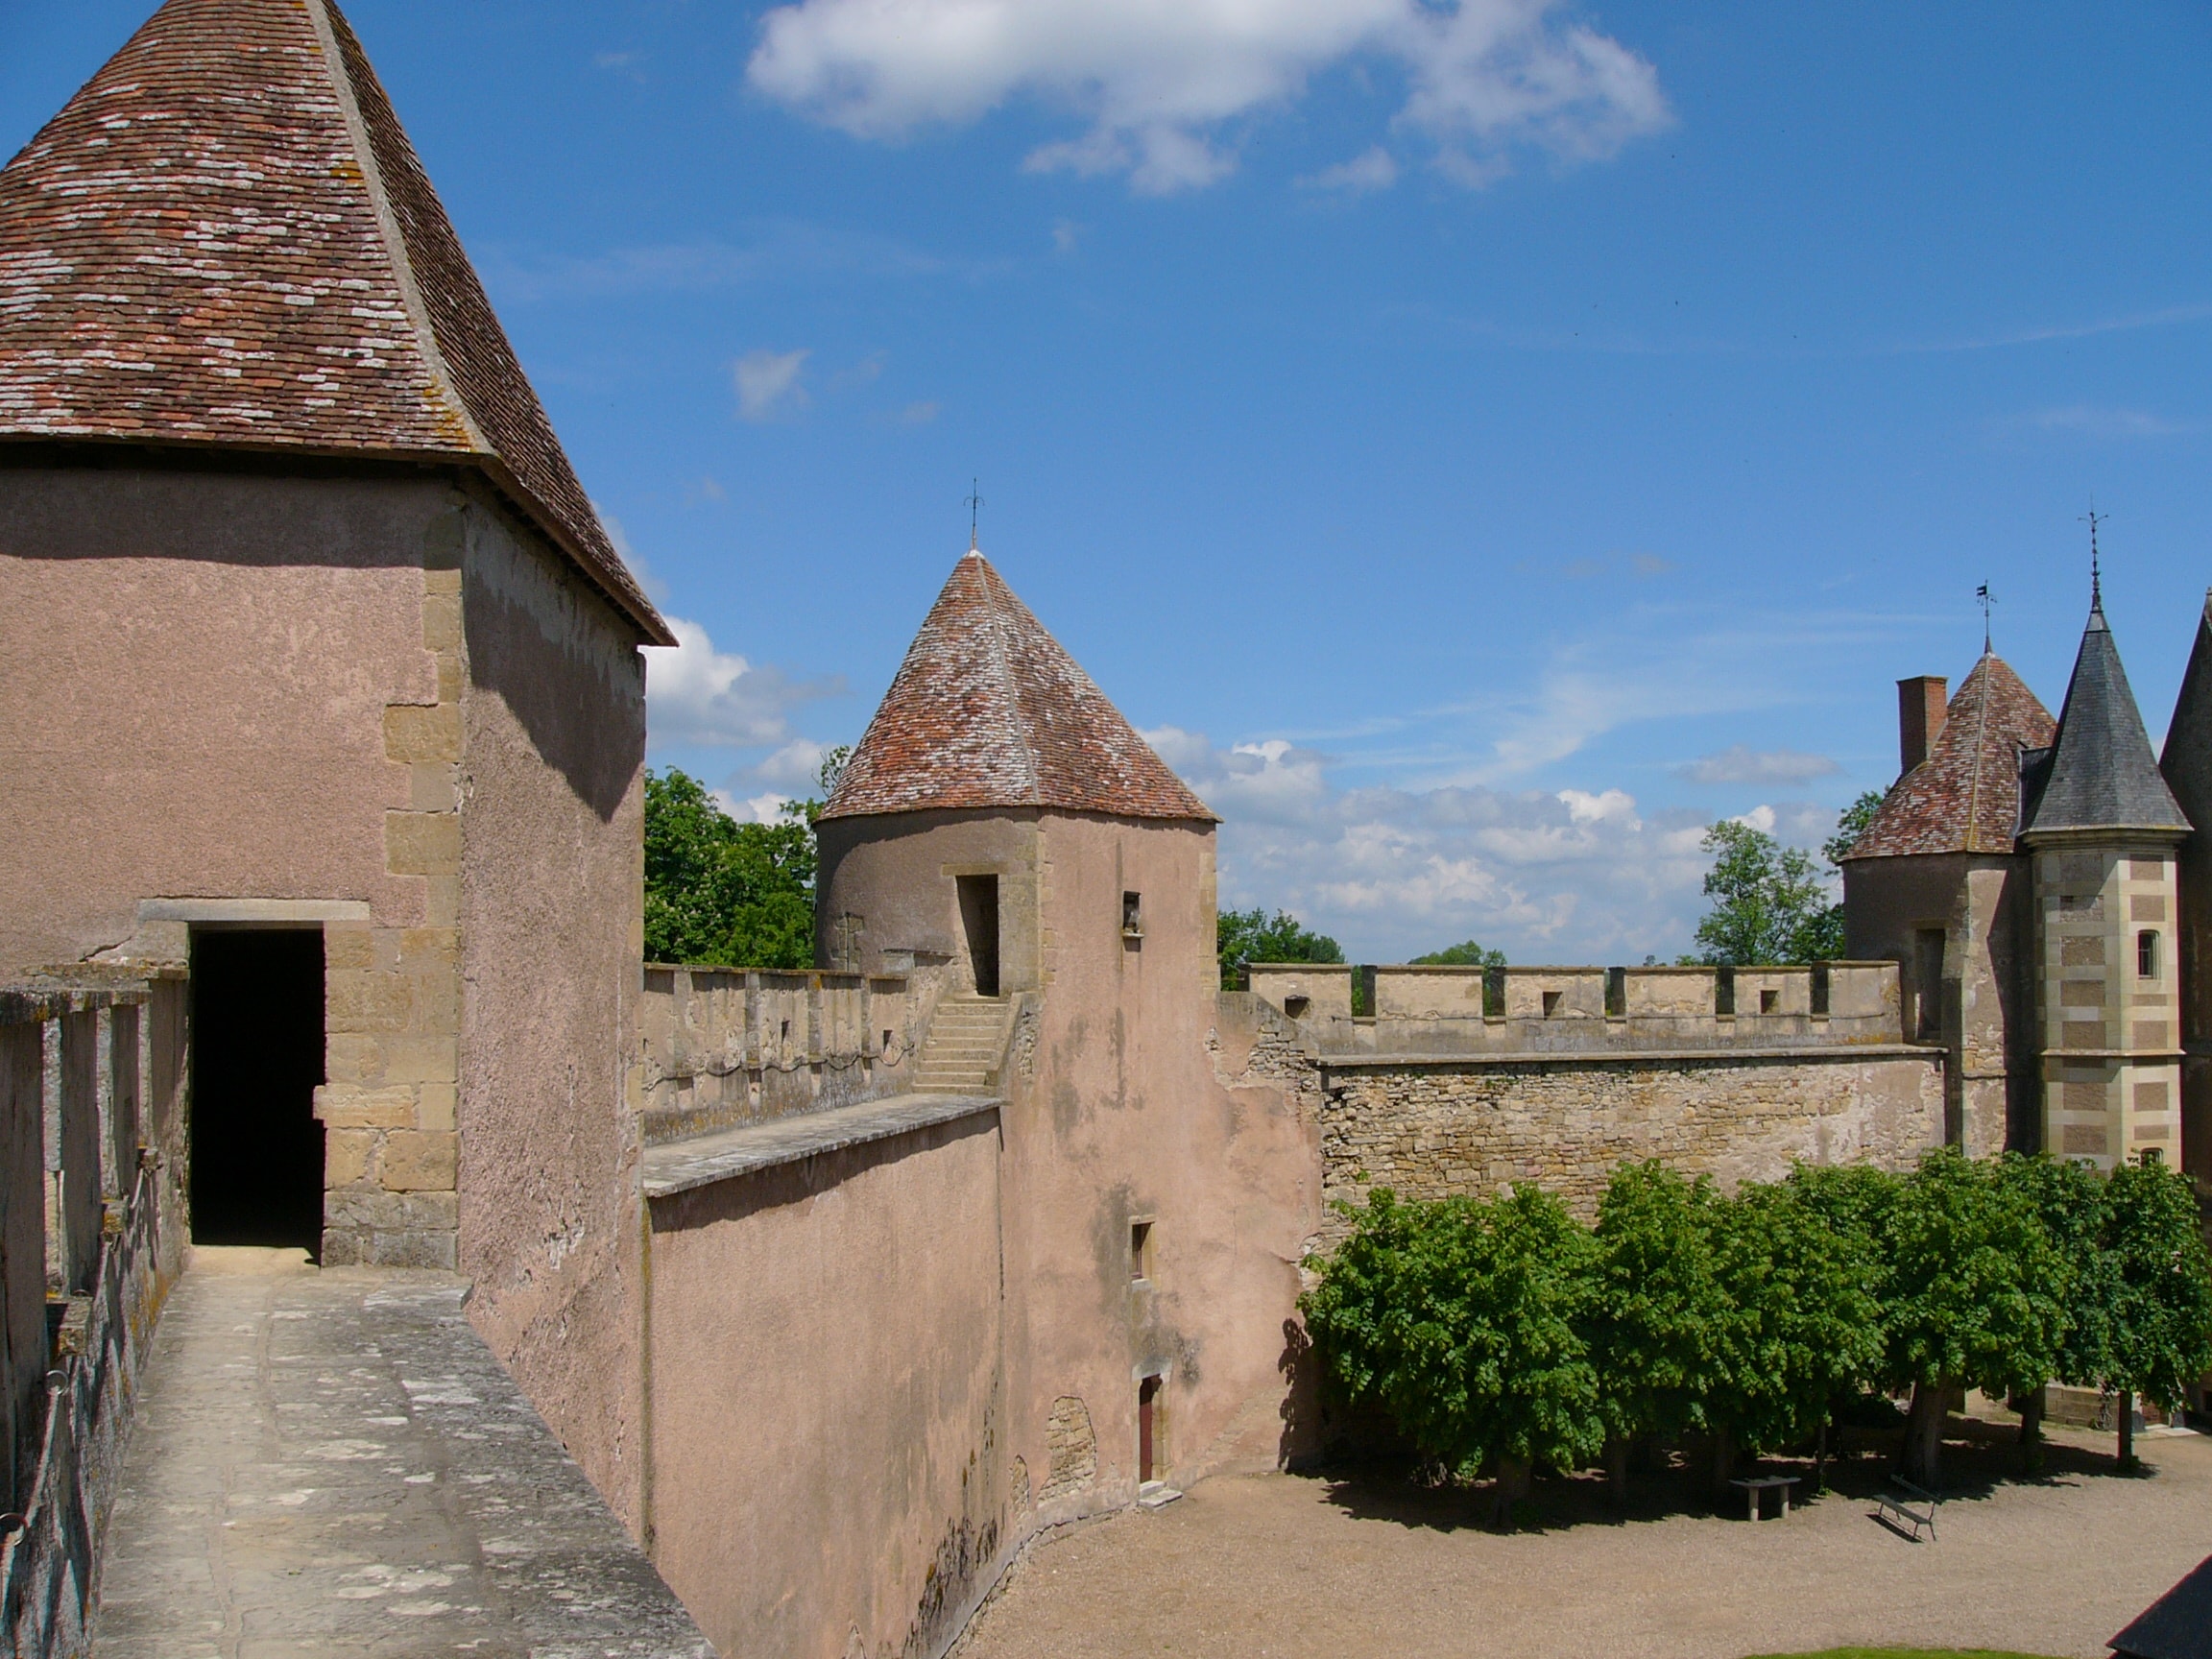 View of the ramparts inside the courtyard of Ainay le Vieil castle